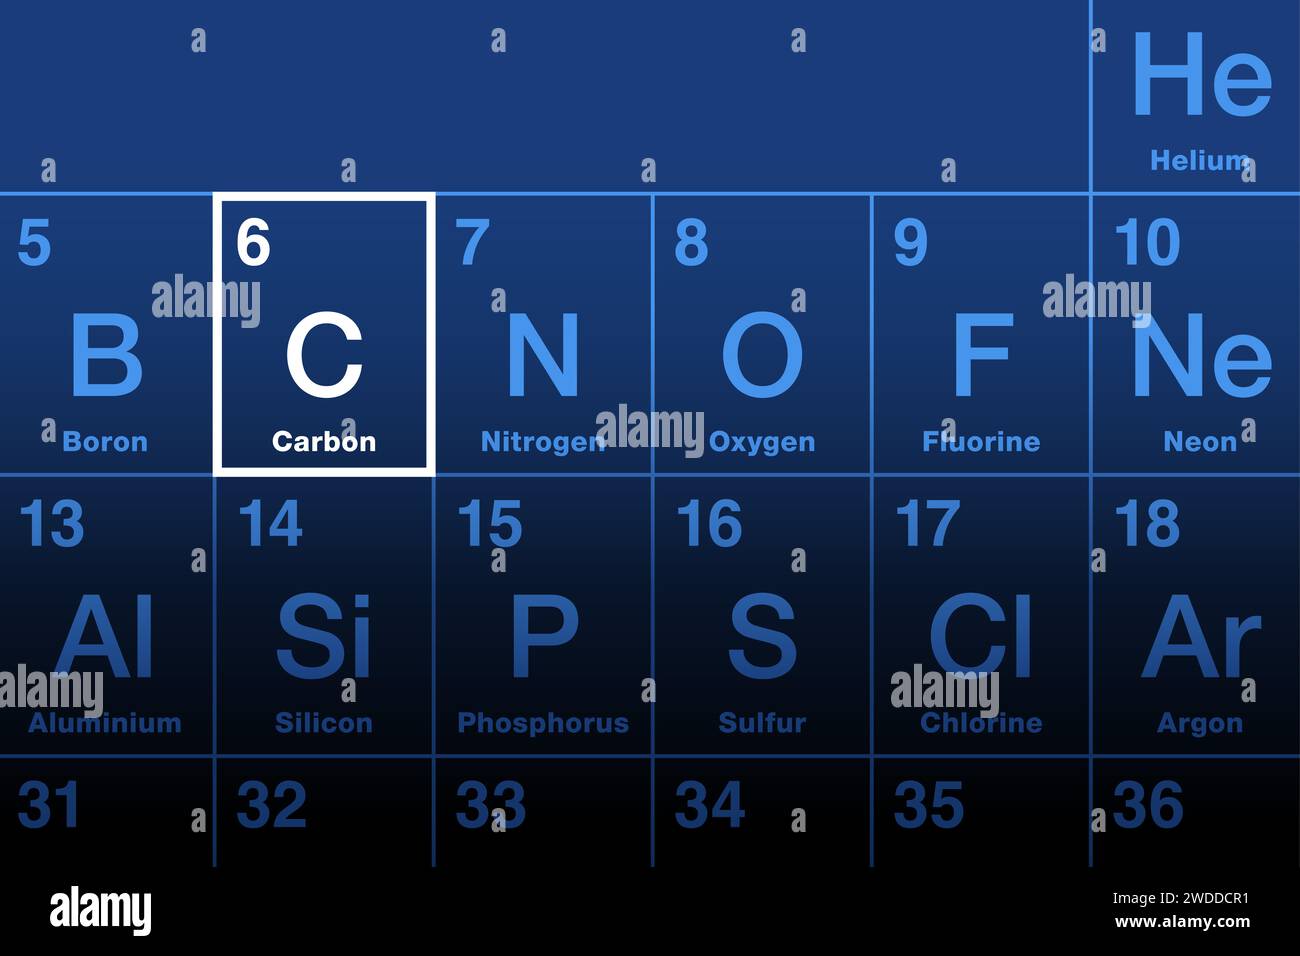 Carbon on periodic table of elements. Nonmetallic chemical element with symbol C from Latin carbo for coal, with atomic number 6. Stock Photo